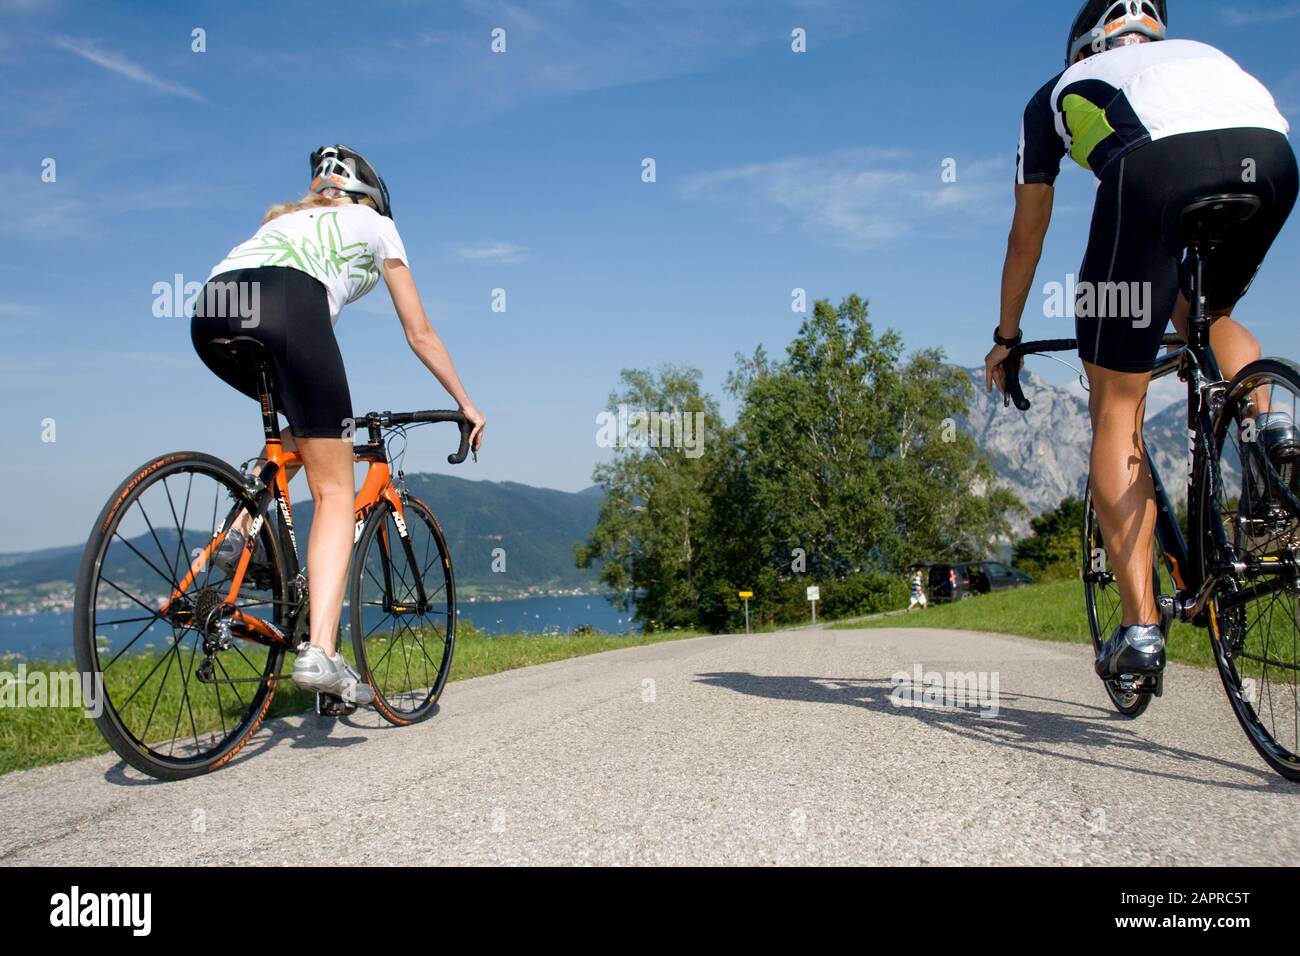 Rennrad High Resolution Stock Photography and Images - Alamy